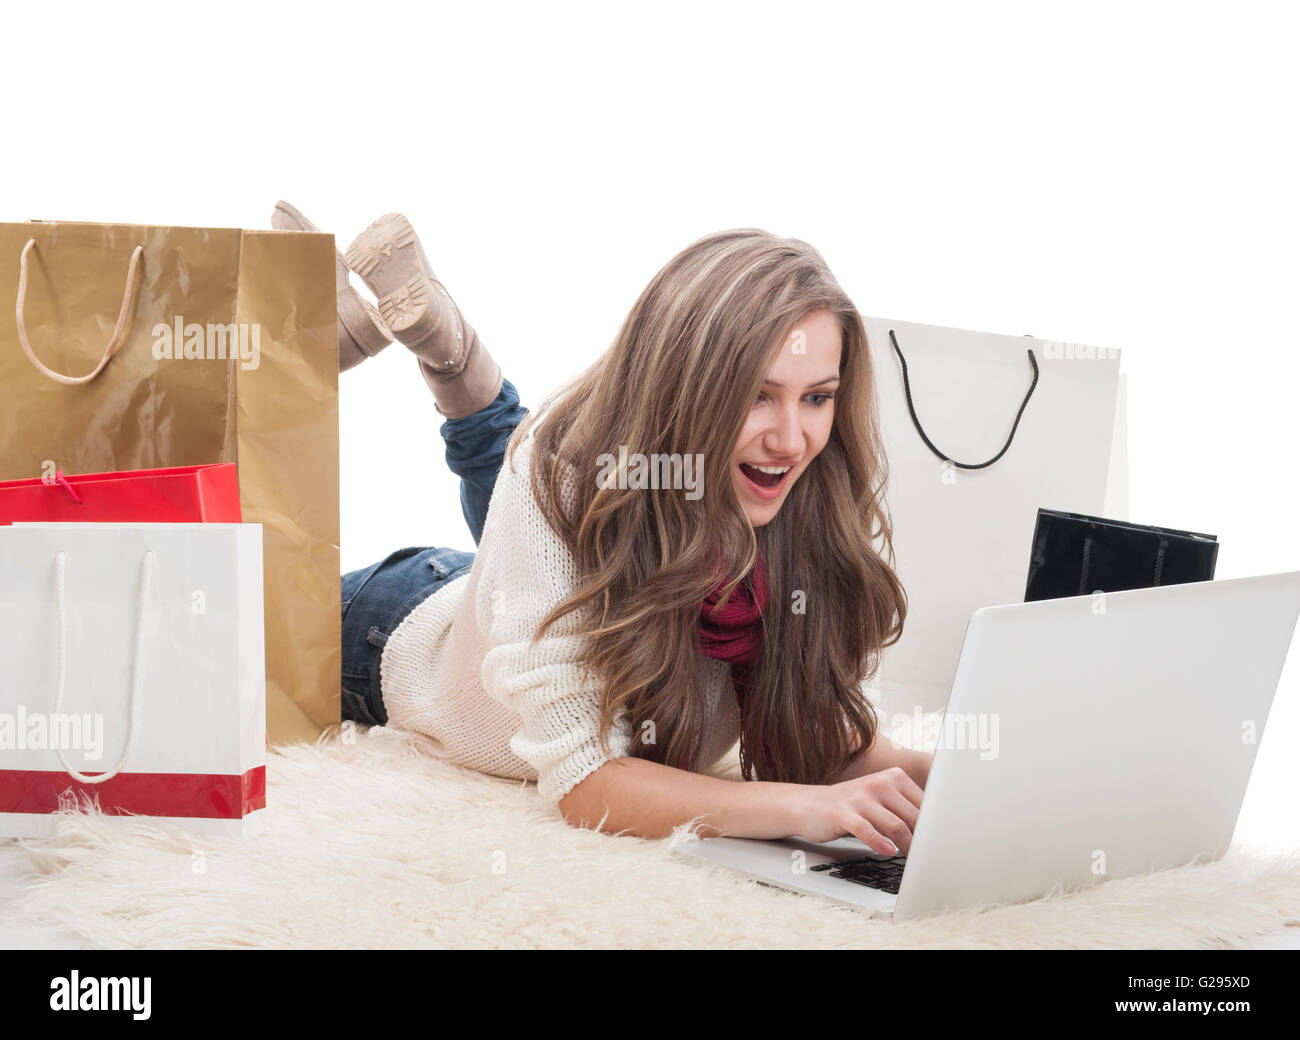 Online shopaholic concept with a woman buying and spending money on internet stores Stock Photo